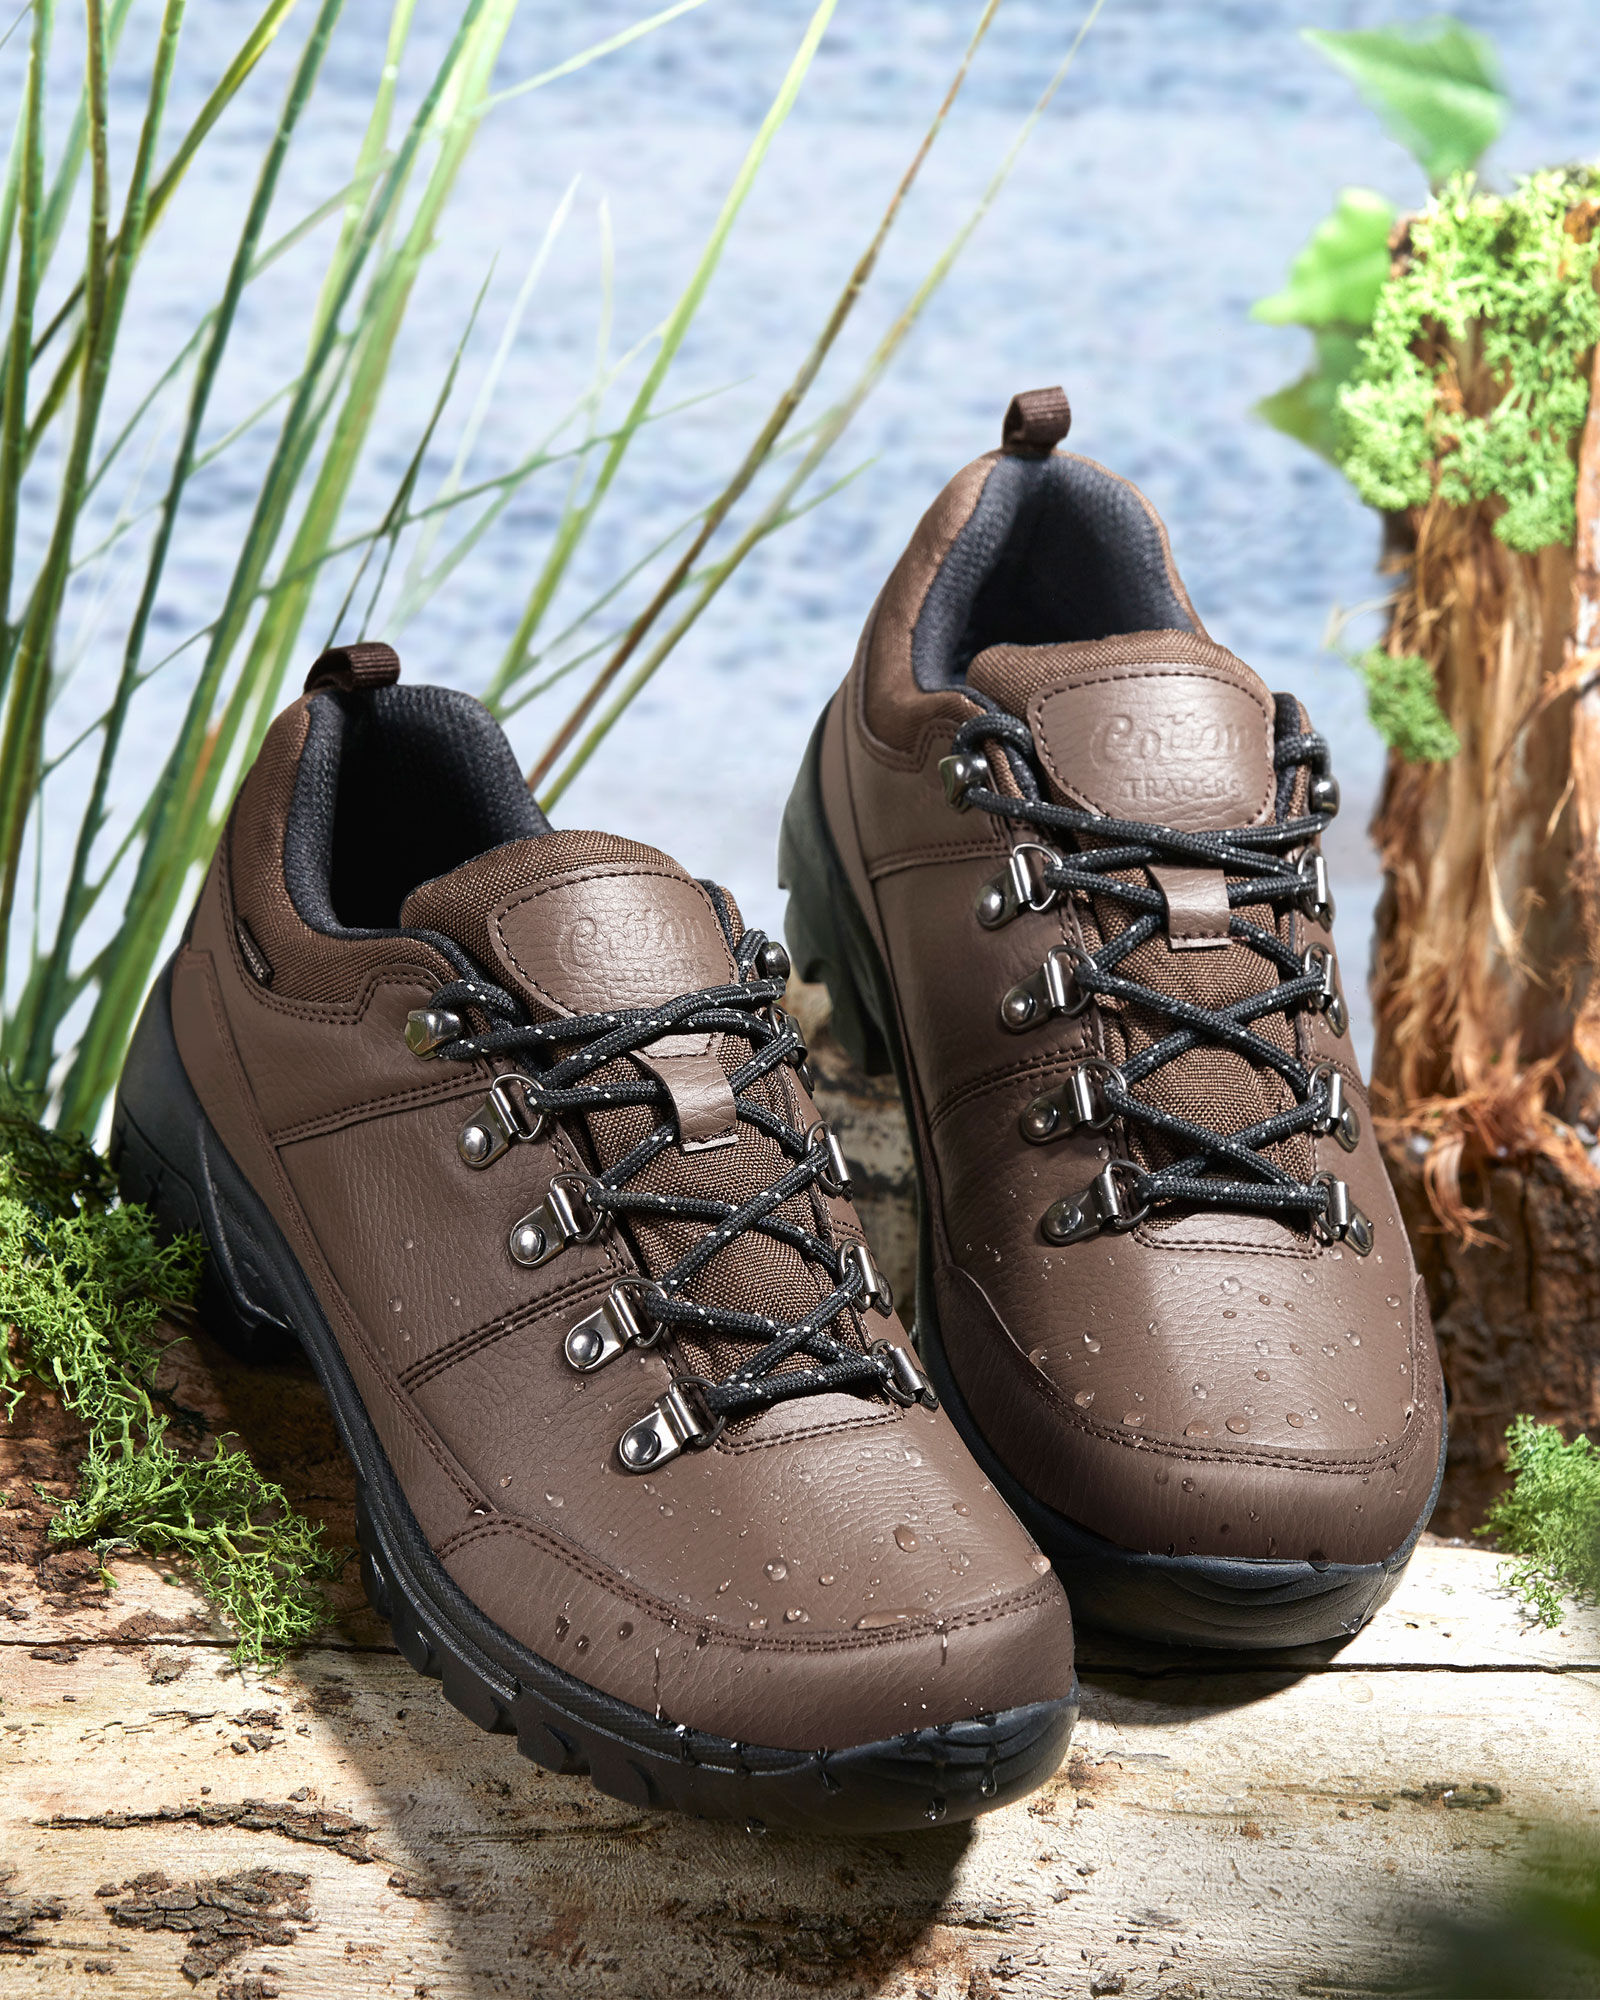 cotton traders ladies walking boots